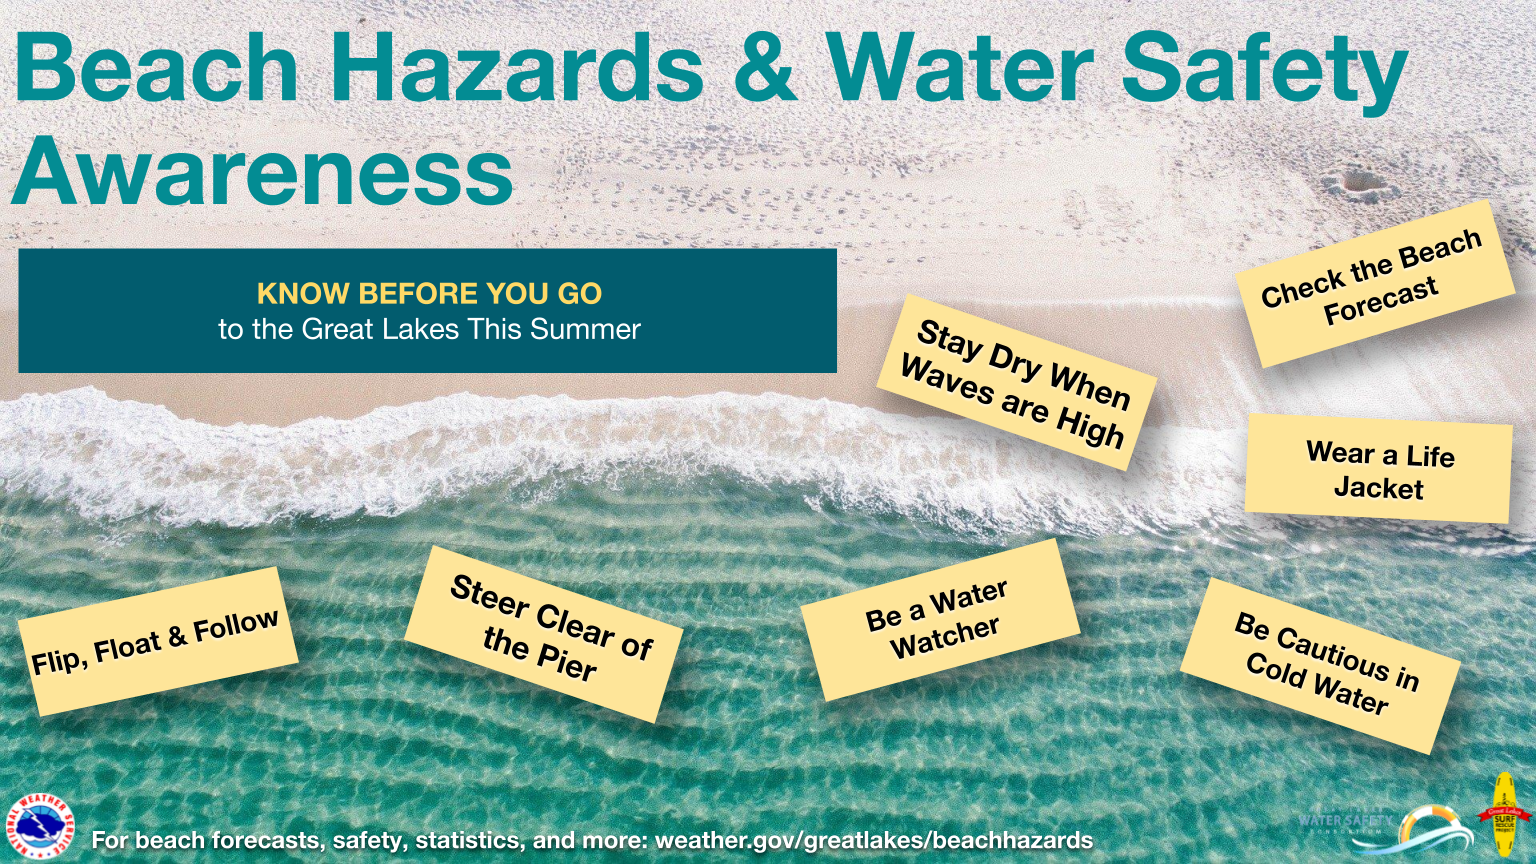 Beach Hazards & Water Safety Awareness: Know before you go to the Great Lakes this summer. Check the beach forecast. Be cautious in cold water. Stay dry when the waves are high. Wear a life jacket. Be a water watcher. Steer clear of the pier. Flip, float and follow.